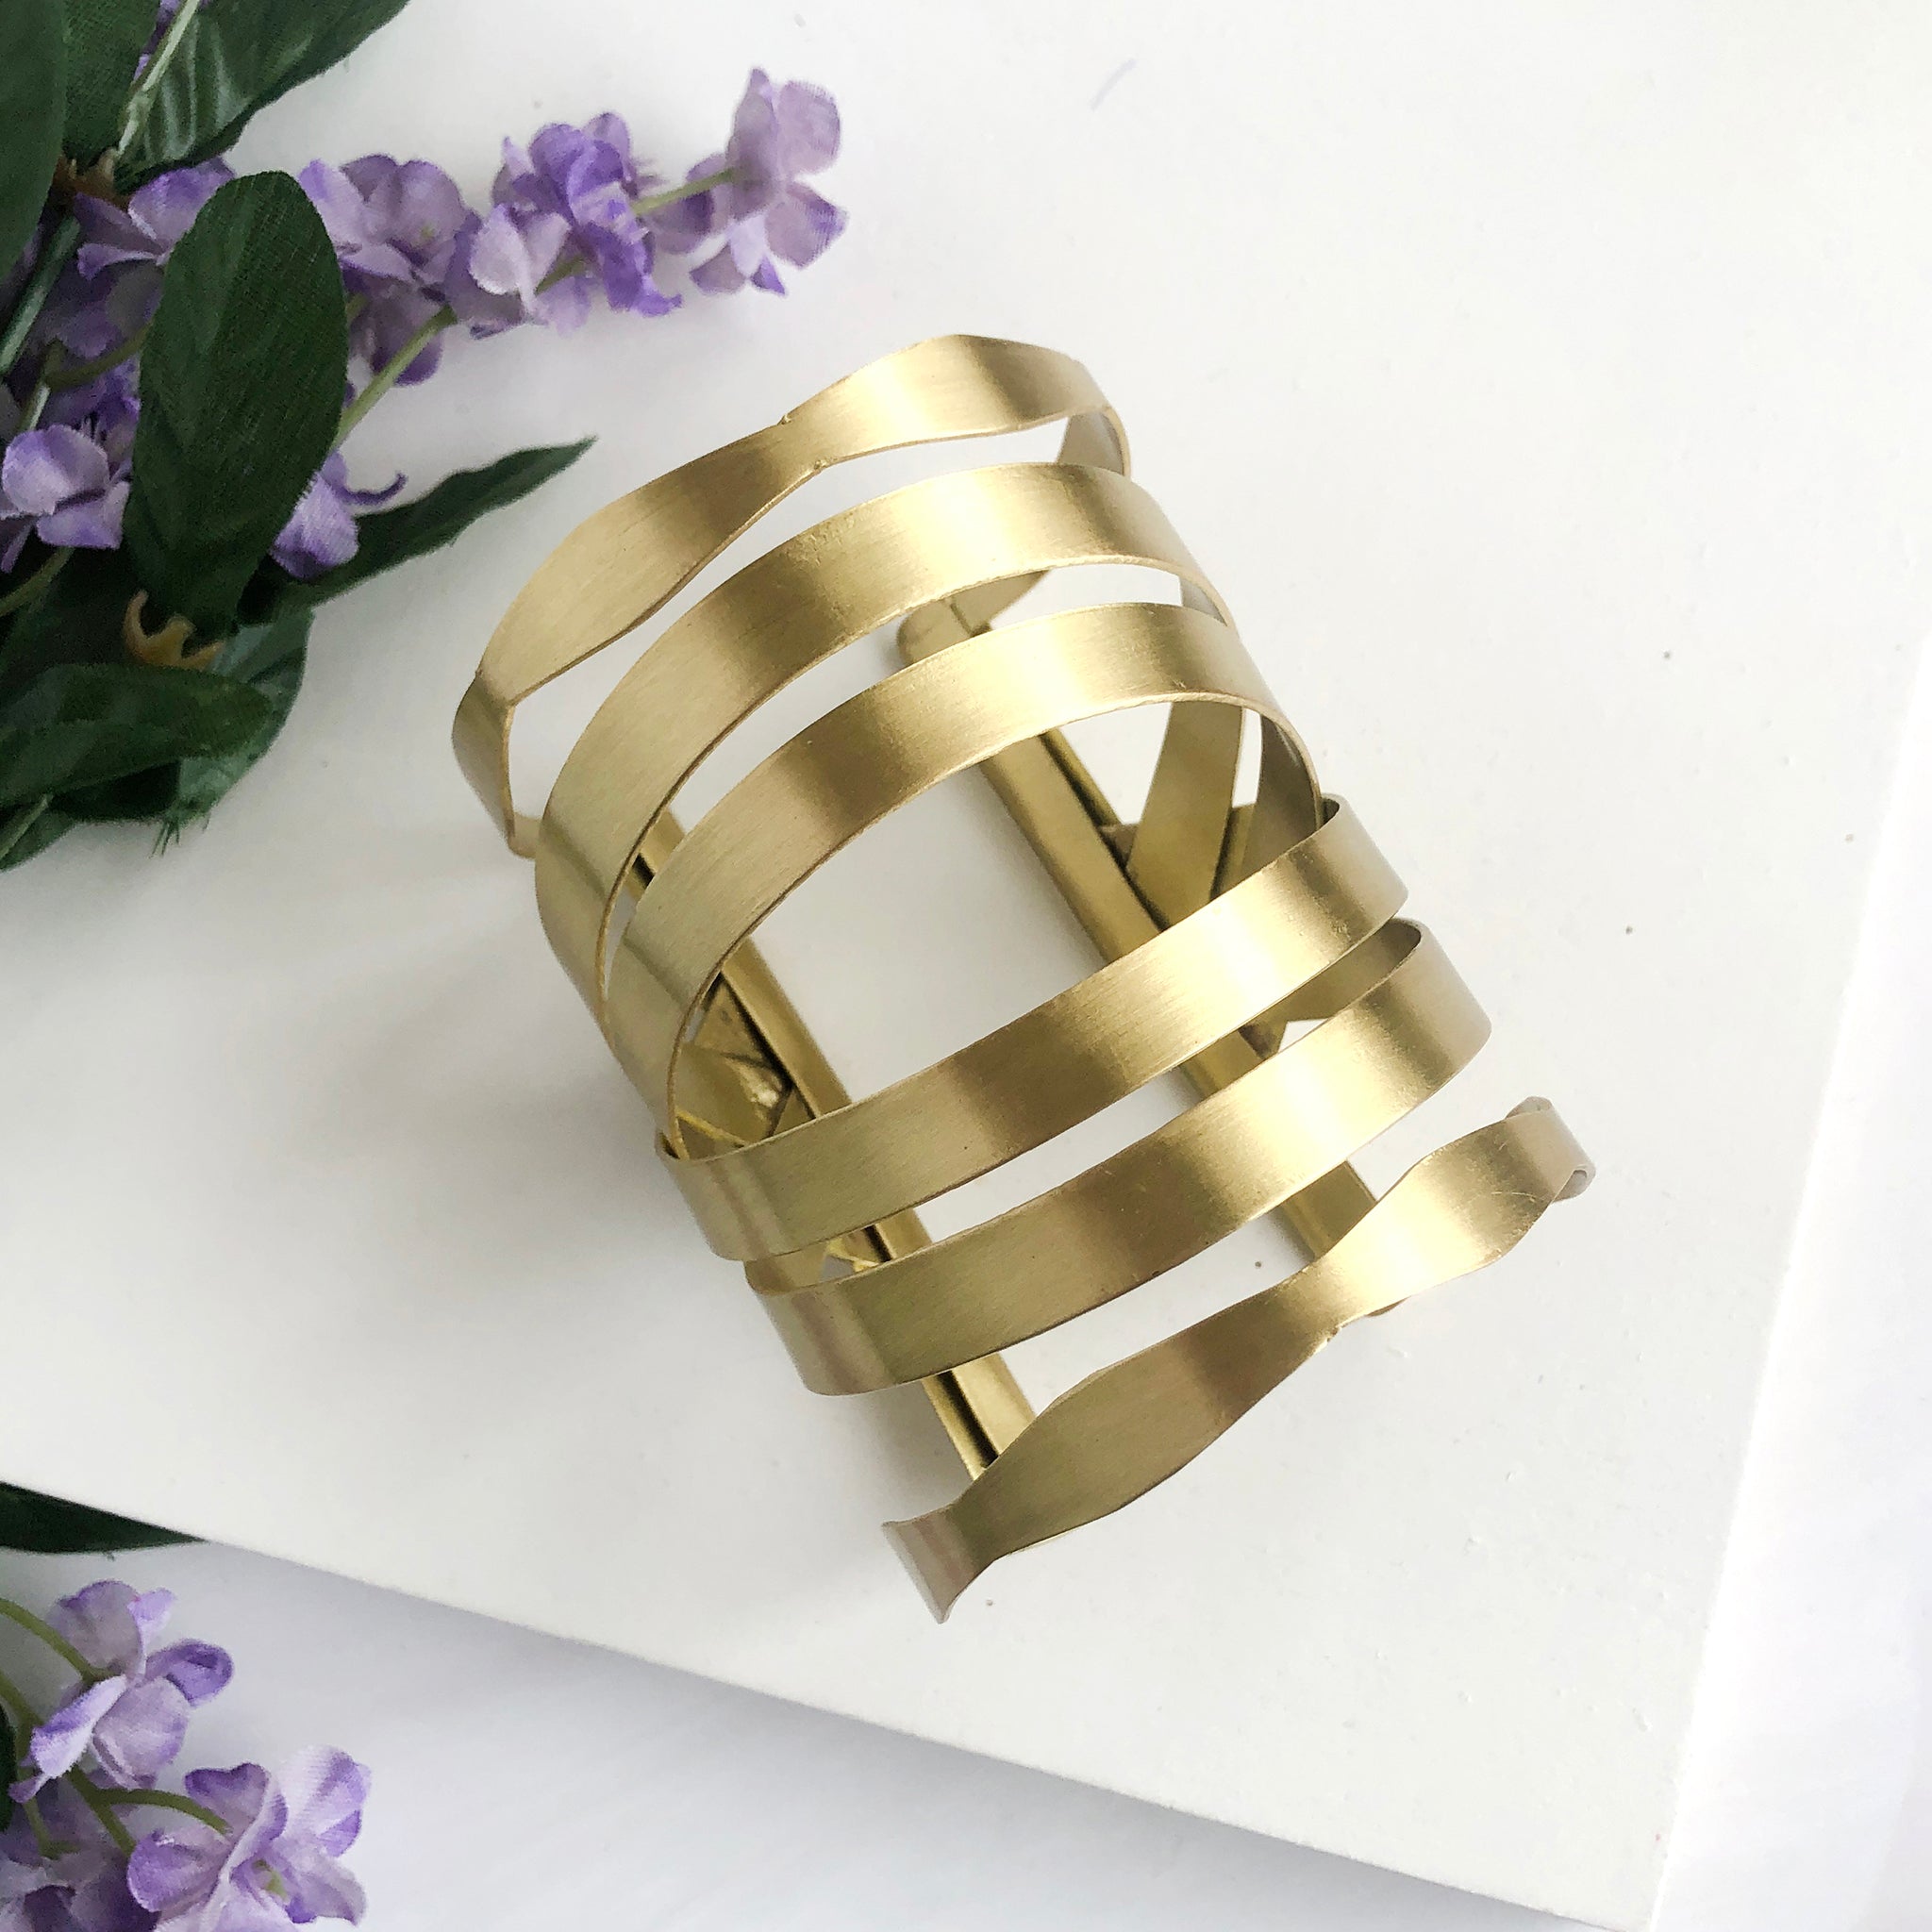 Six metal bands arch and crisscross to form a gold cuff bracelet.